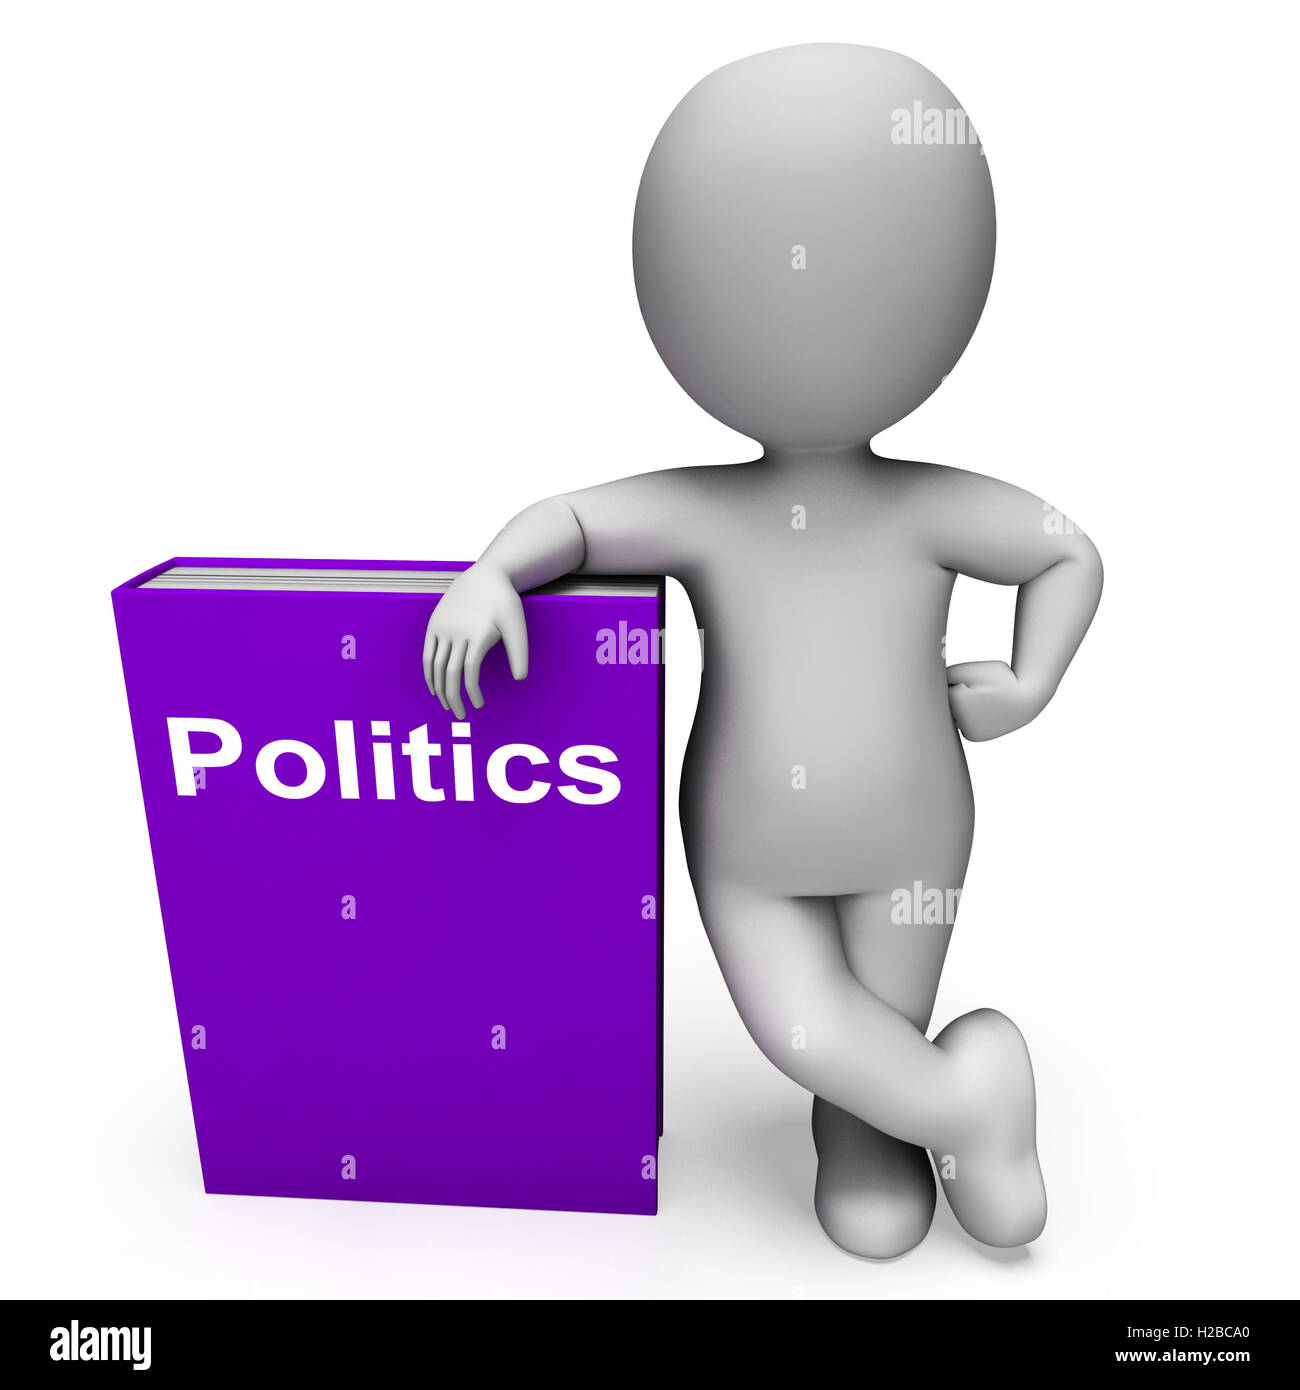 Politics Book And Character Shows Books About Government Democra Stock Photo